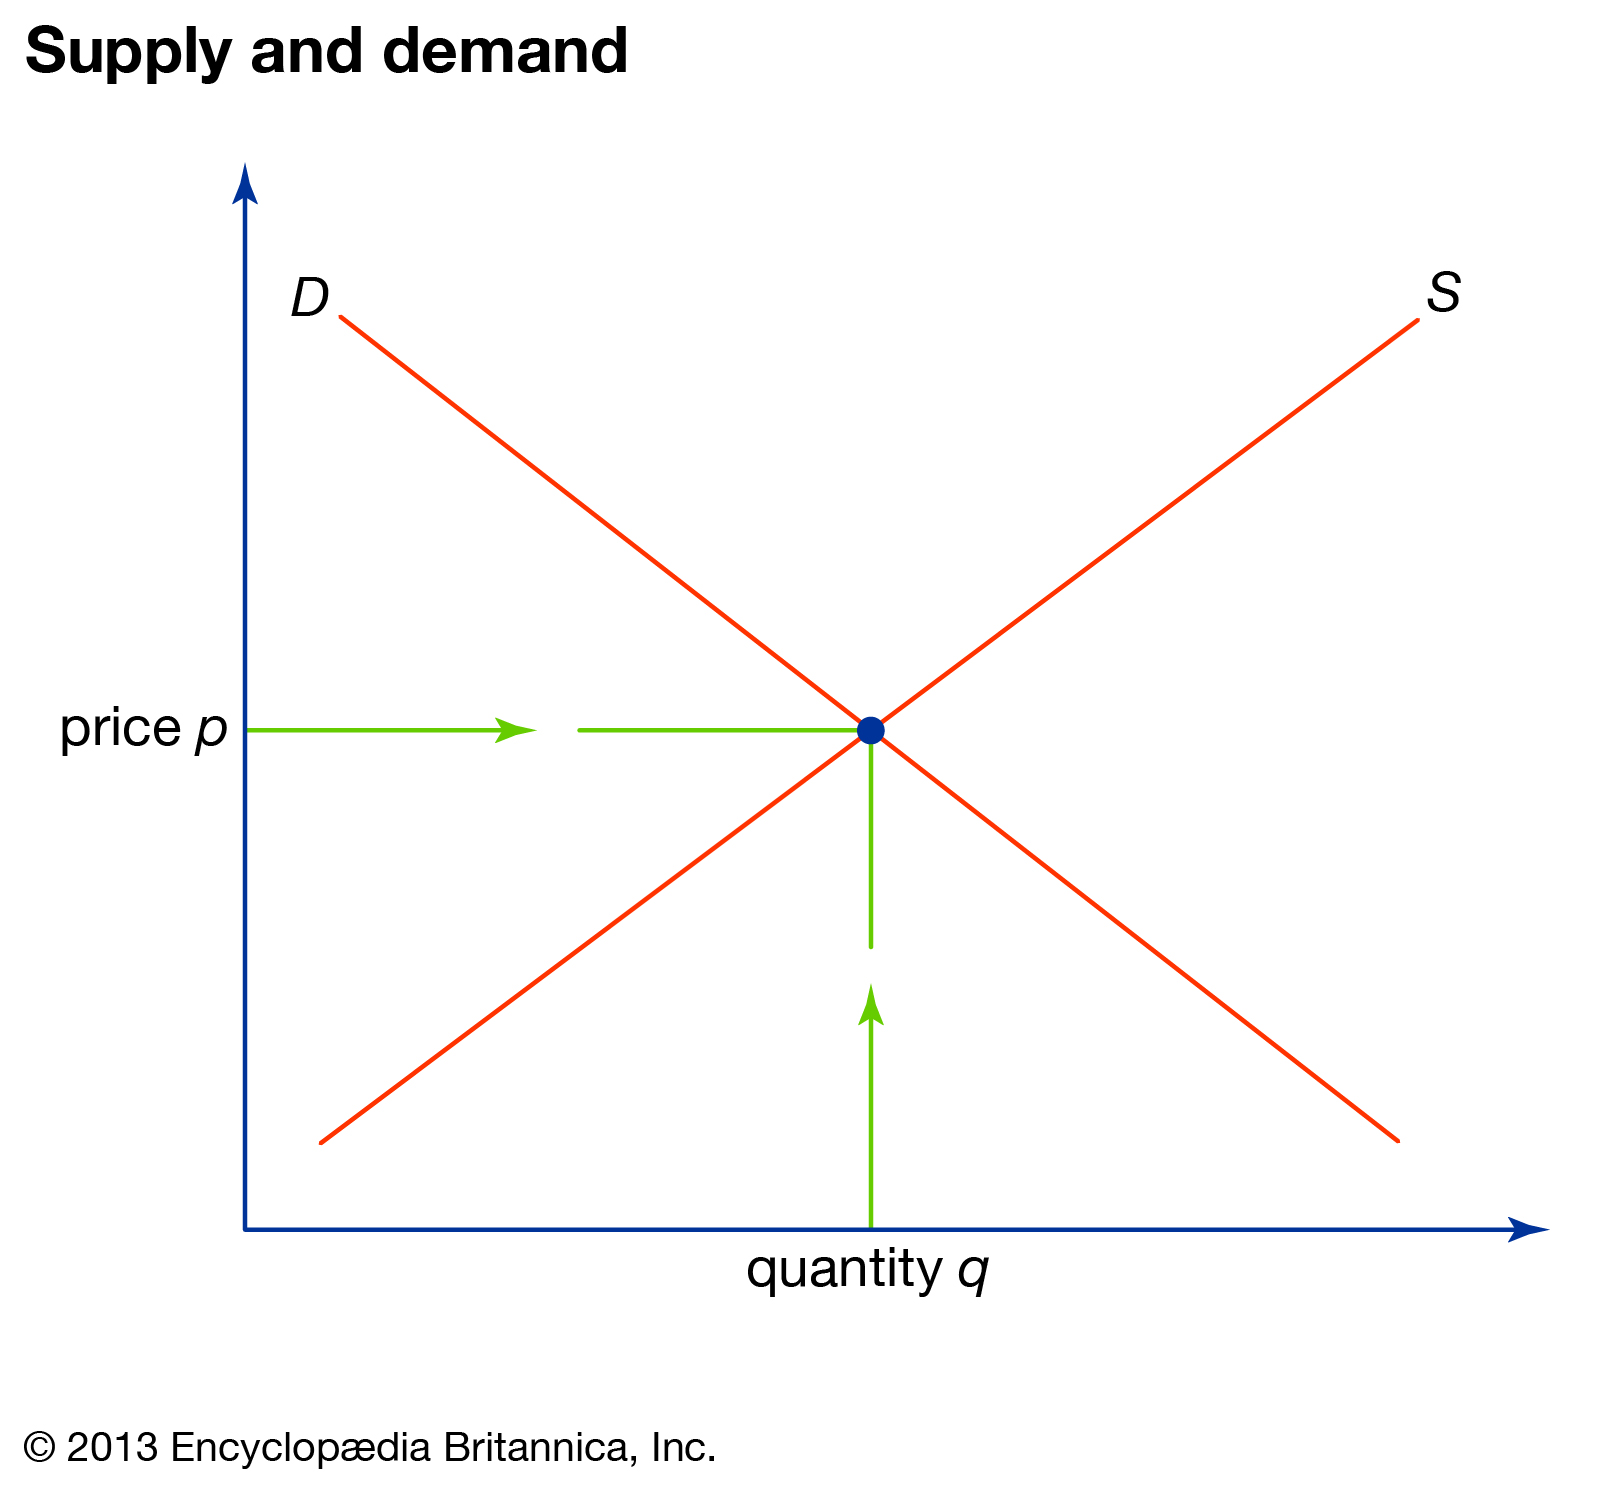 As price go up, demand falls and supply increases